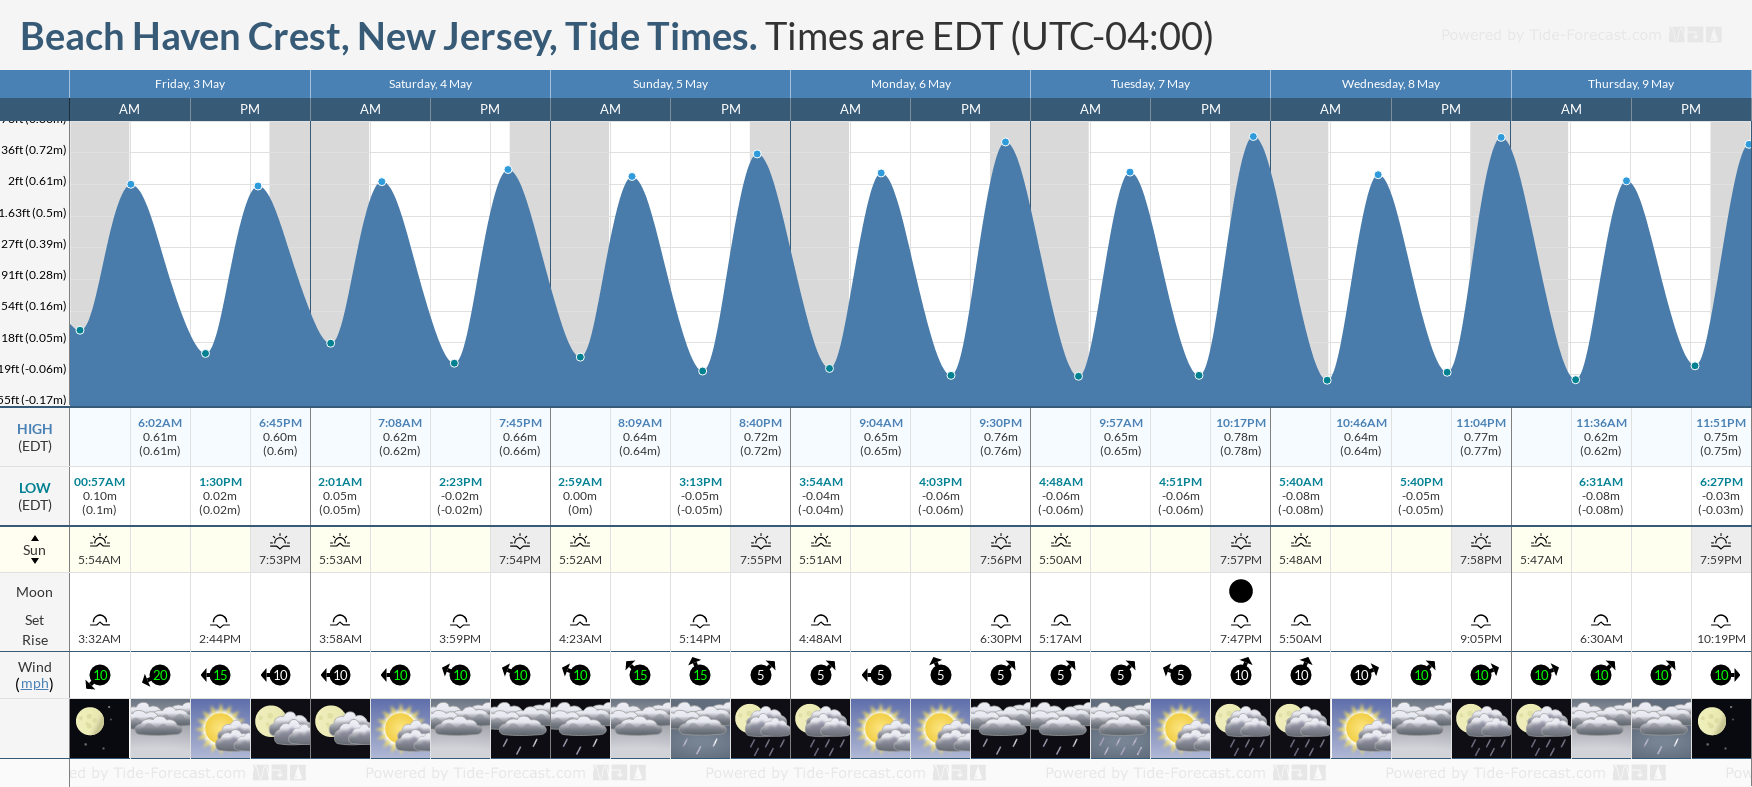 Beach Haven Crest, New Jersey Tide Chart including high and low tide tide times for the next 7 days